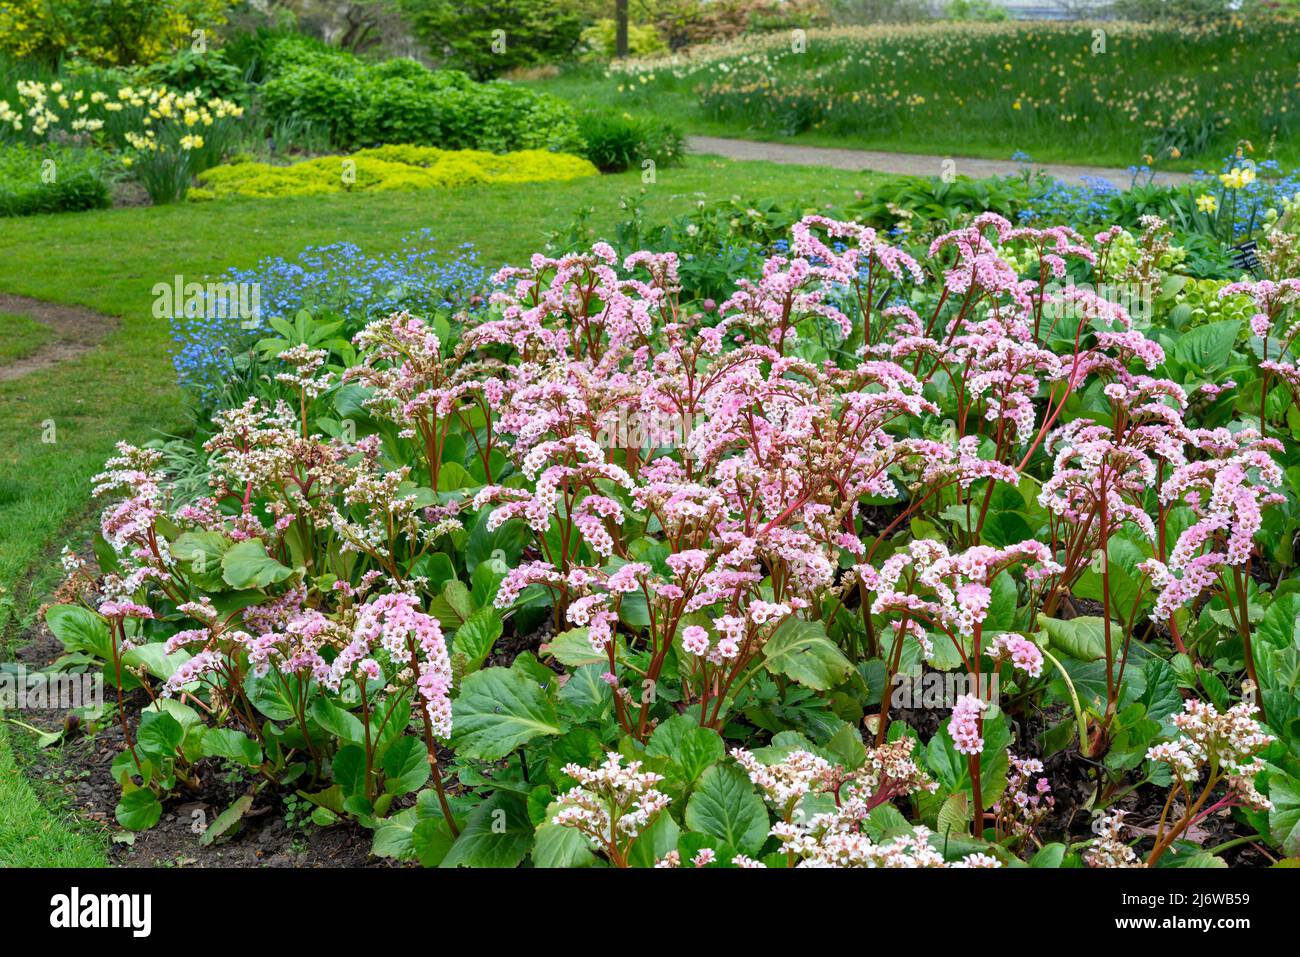 Bergenia Cordifolia (Elephant's Ears). An evergreen perennial plant with masses of pink flowers in spring. Stock Photo